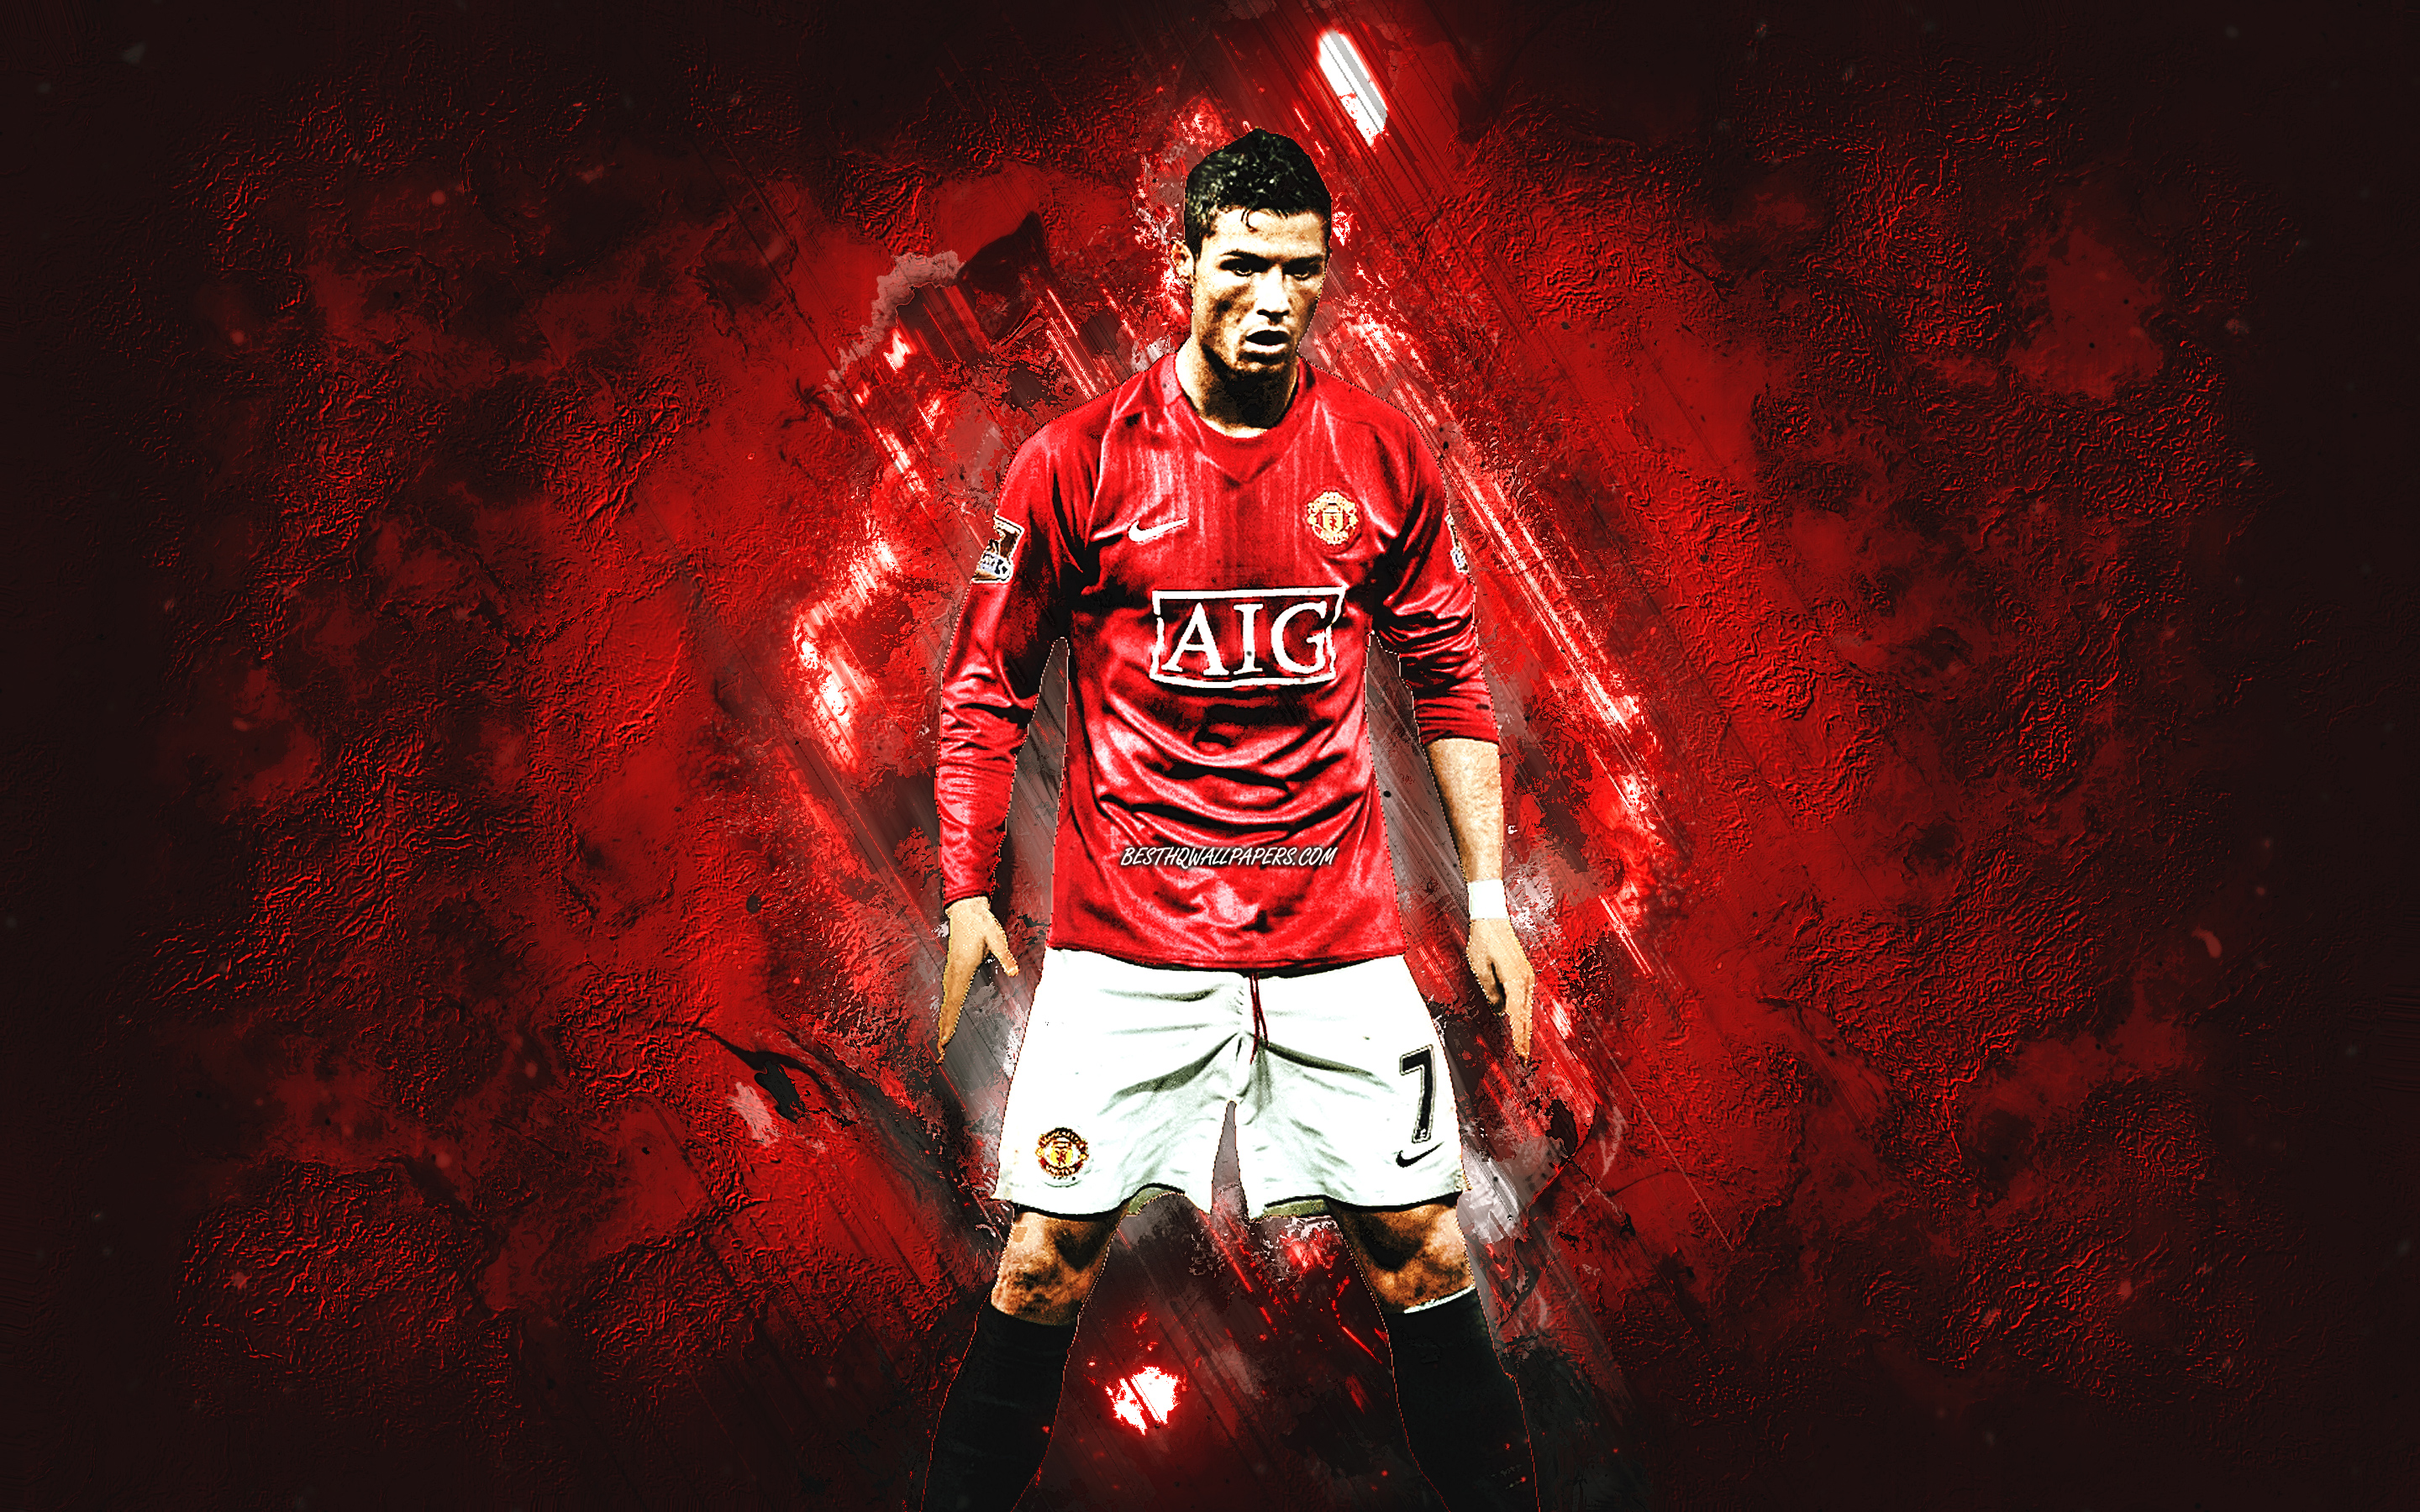 Download wallpaper Cristiano Ronaldo, CR Manchester United FC, young Ronaldo, Premier League, red stone background, football, grunge art, England for desktop with resolution 2880x1800. High Quality HD picture wallpaper